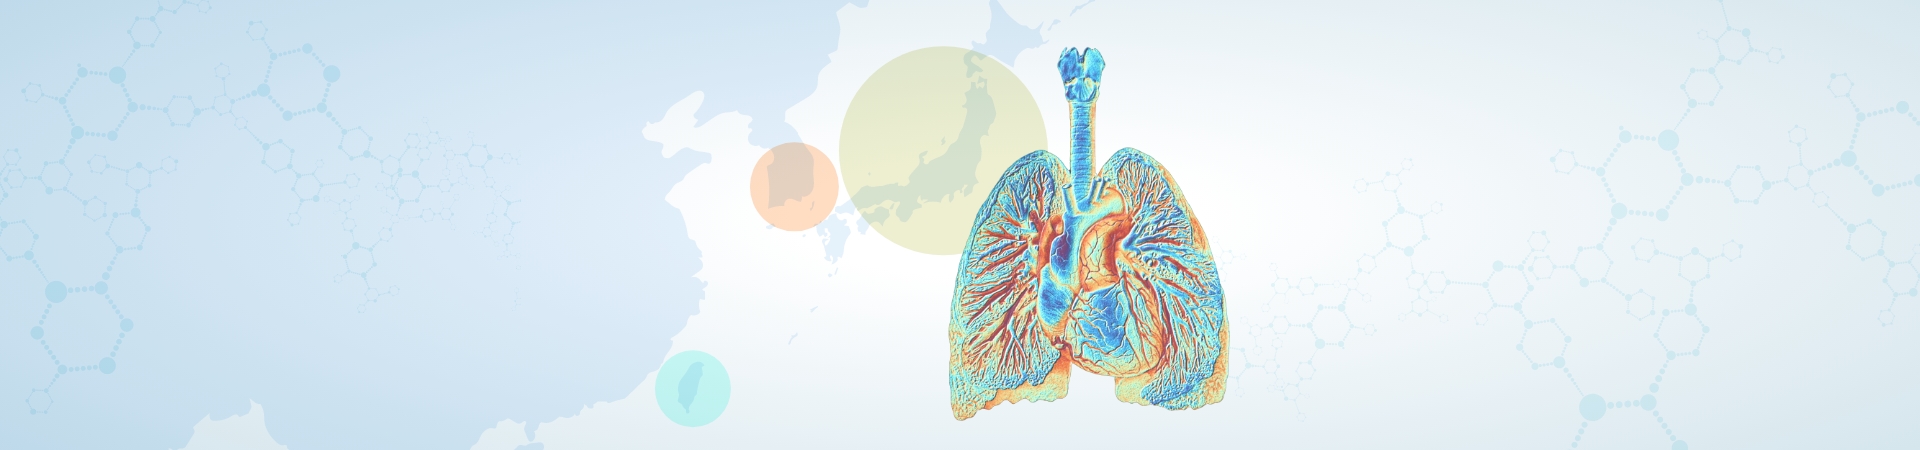 Infographic | Breathing in a new era: a comparative analysis of lung cancer policies in Japan, South Korea and Taiwan